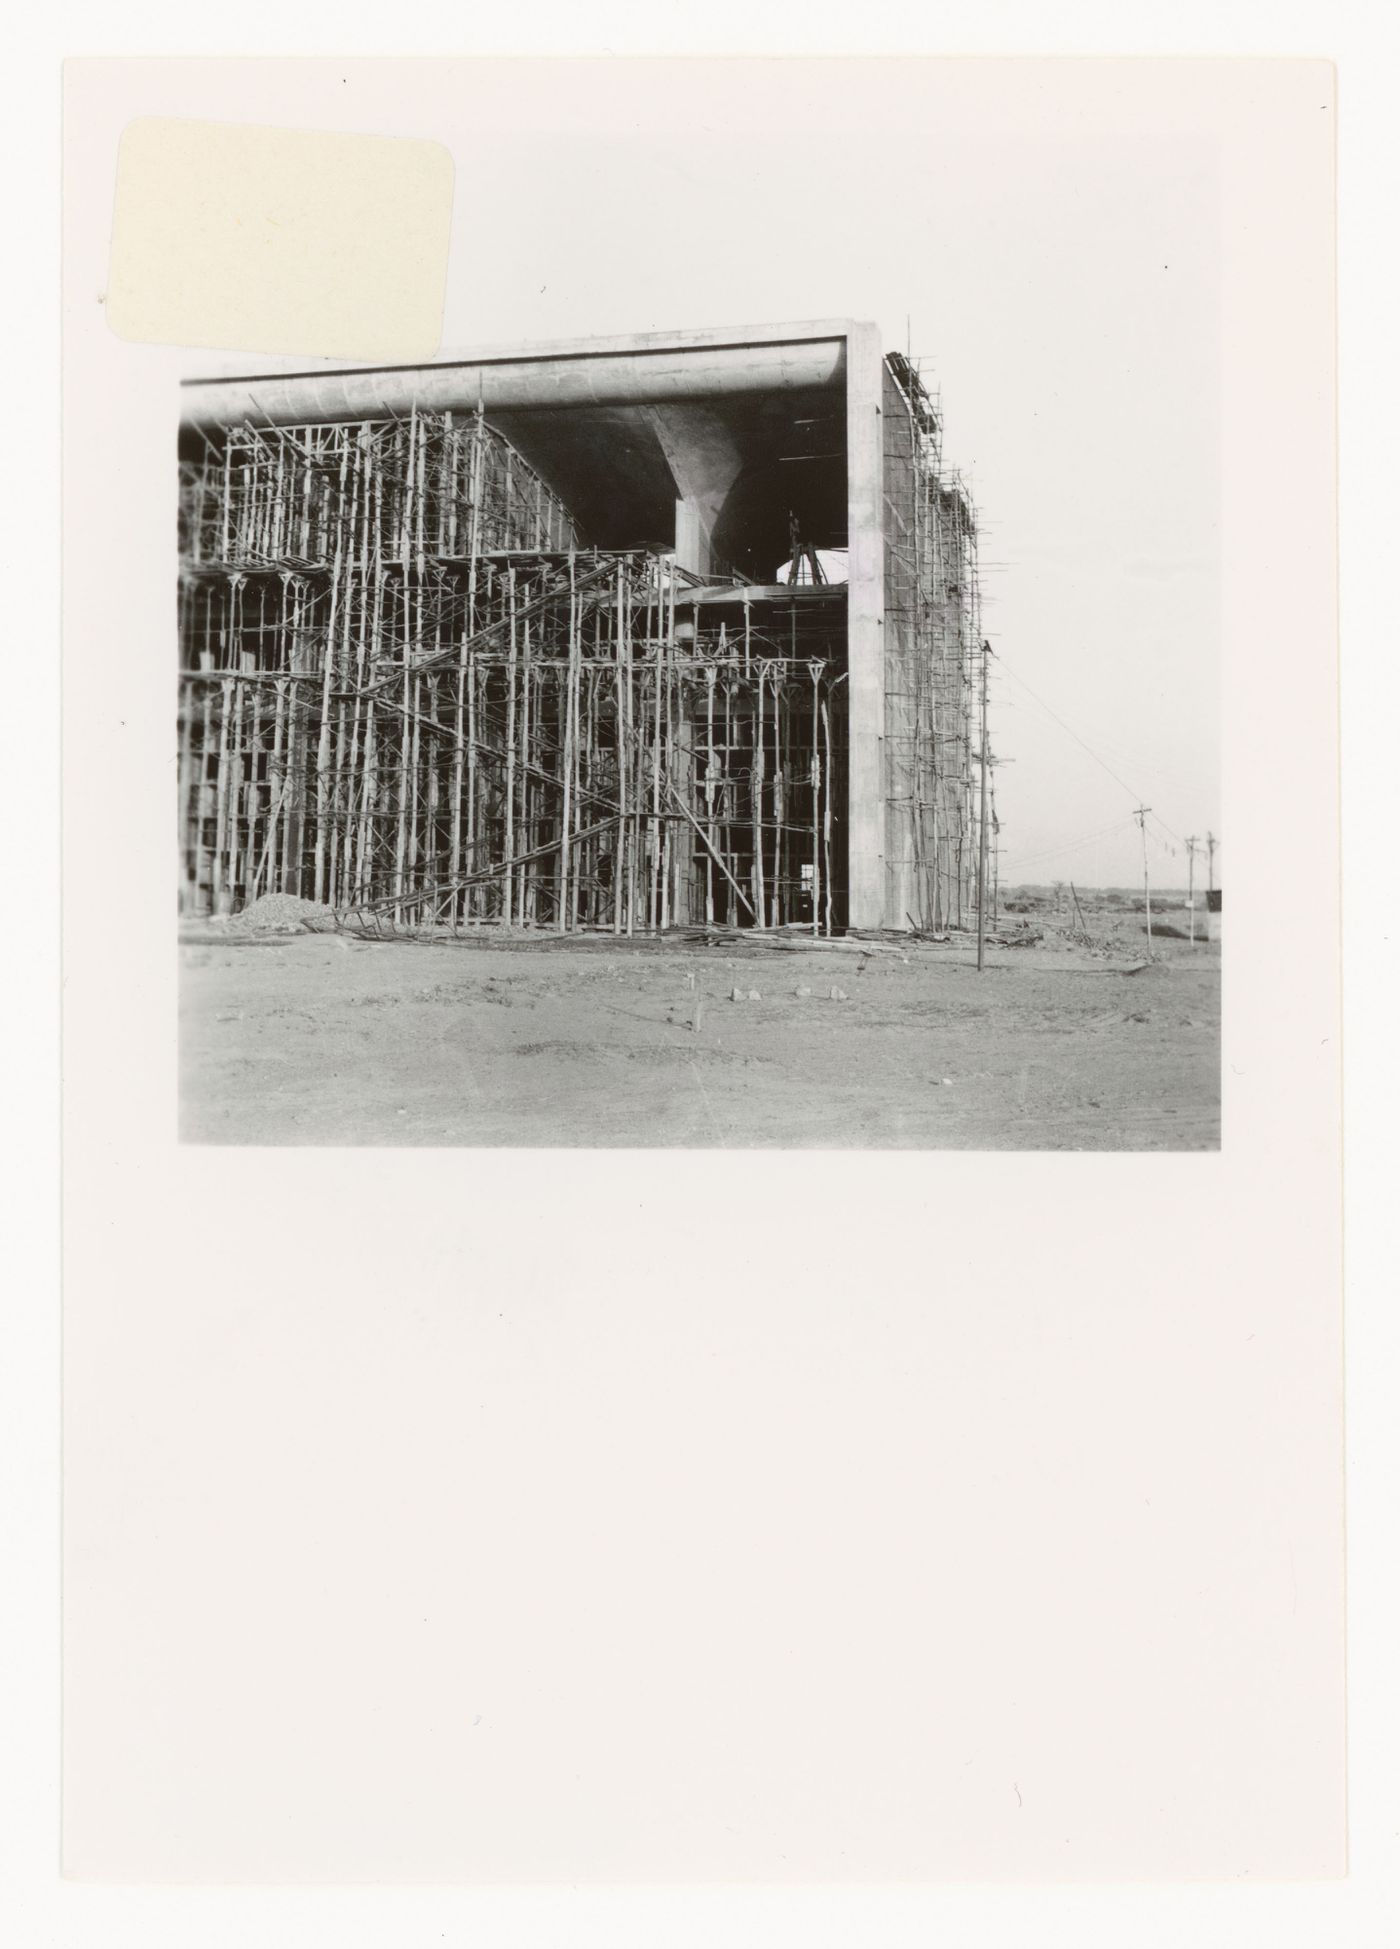 Partial view of the High Court under construction, Capitol Complex, Sector 1, Chandigarh, India